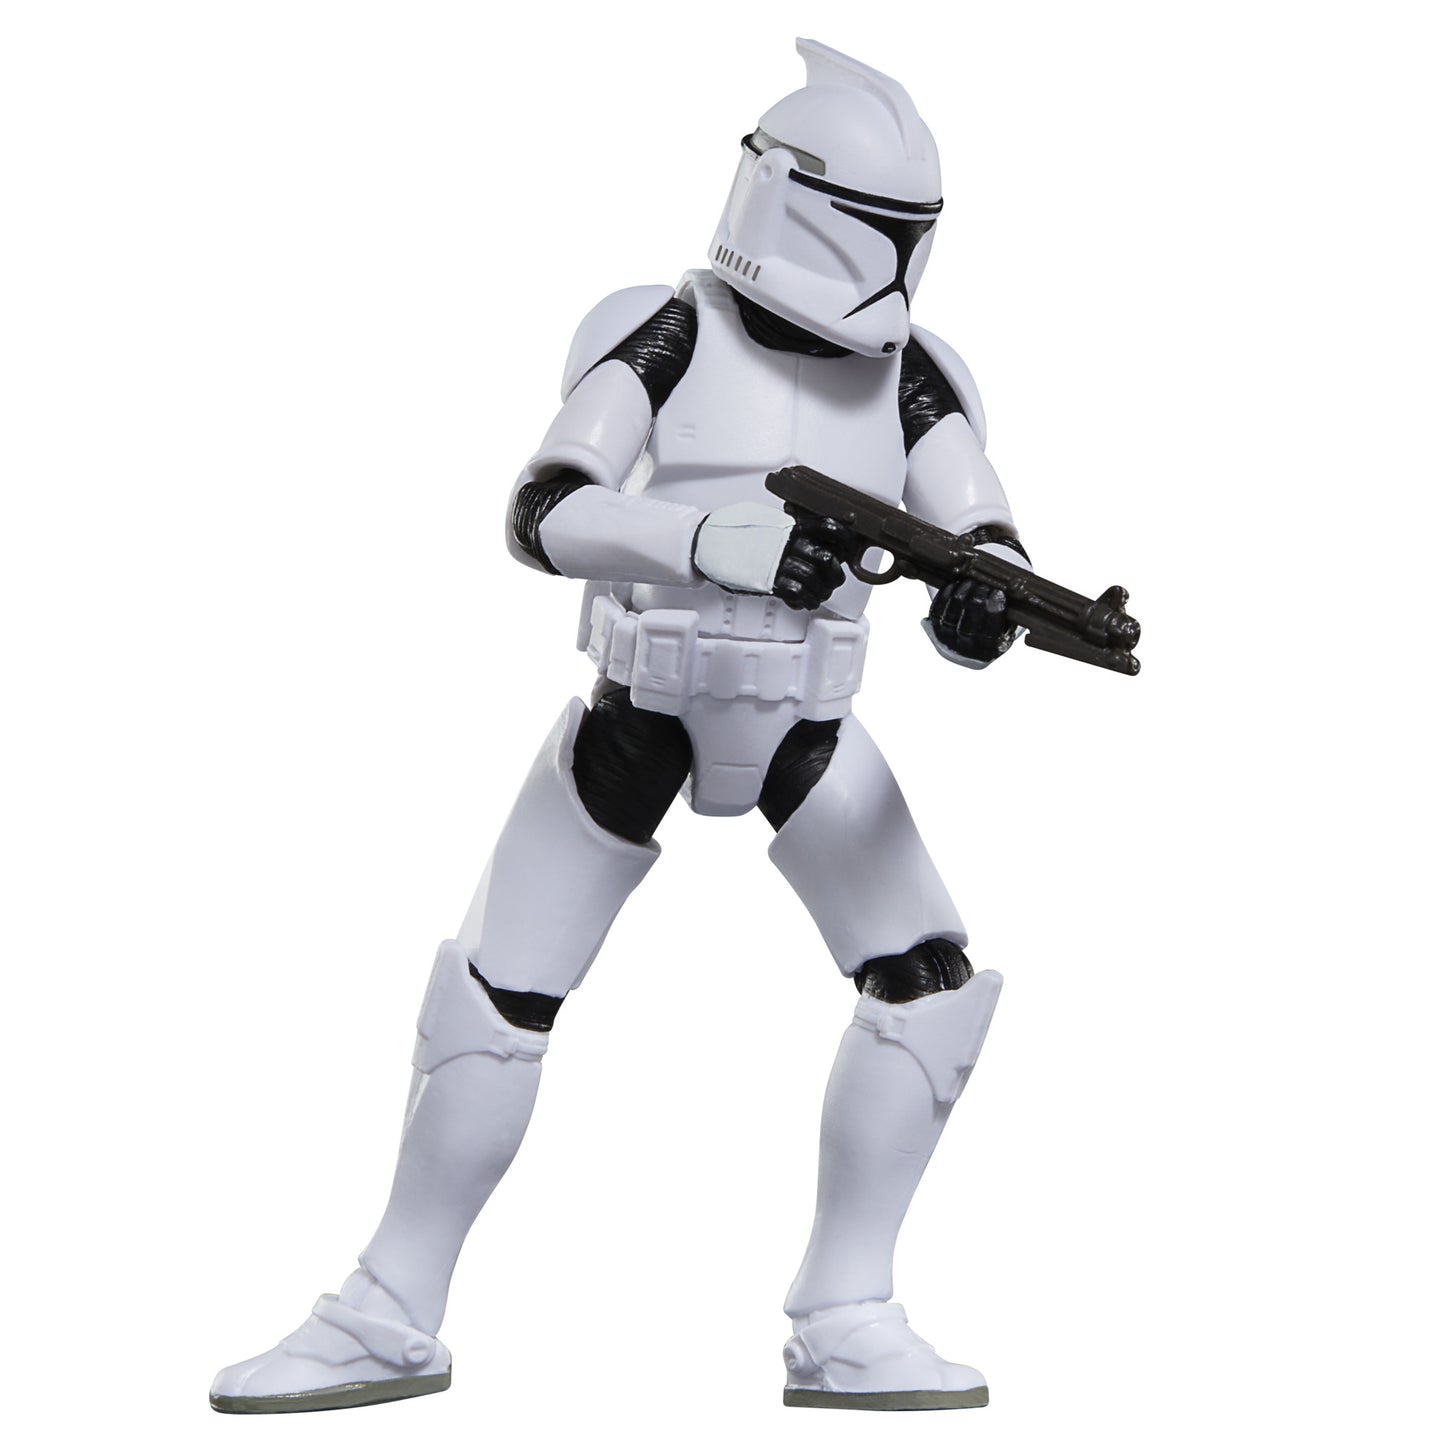 Star Wars The Vintage Collection Phase I Clone Trooper, Star Wars: Attack of the Clones 3.75 Inch Collectible Action Figure